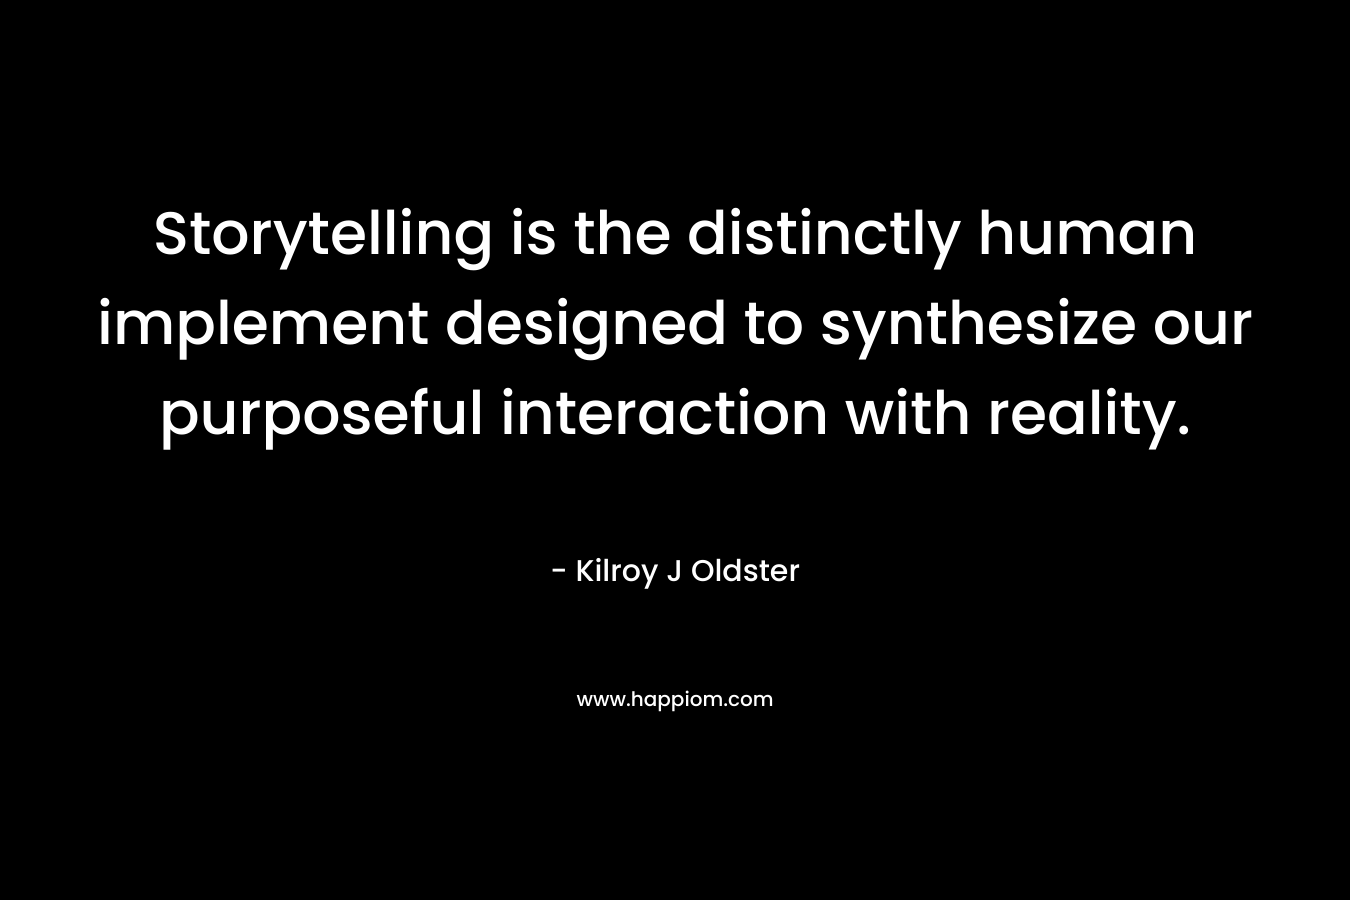 Storytelling is the distinctly human implement designed to synthesize our purposeful interaction with reality.